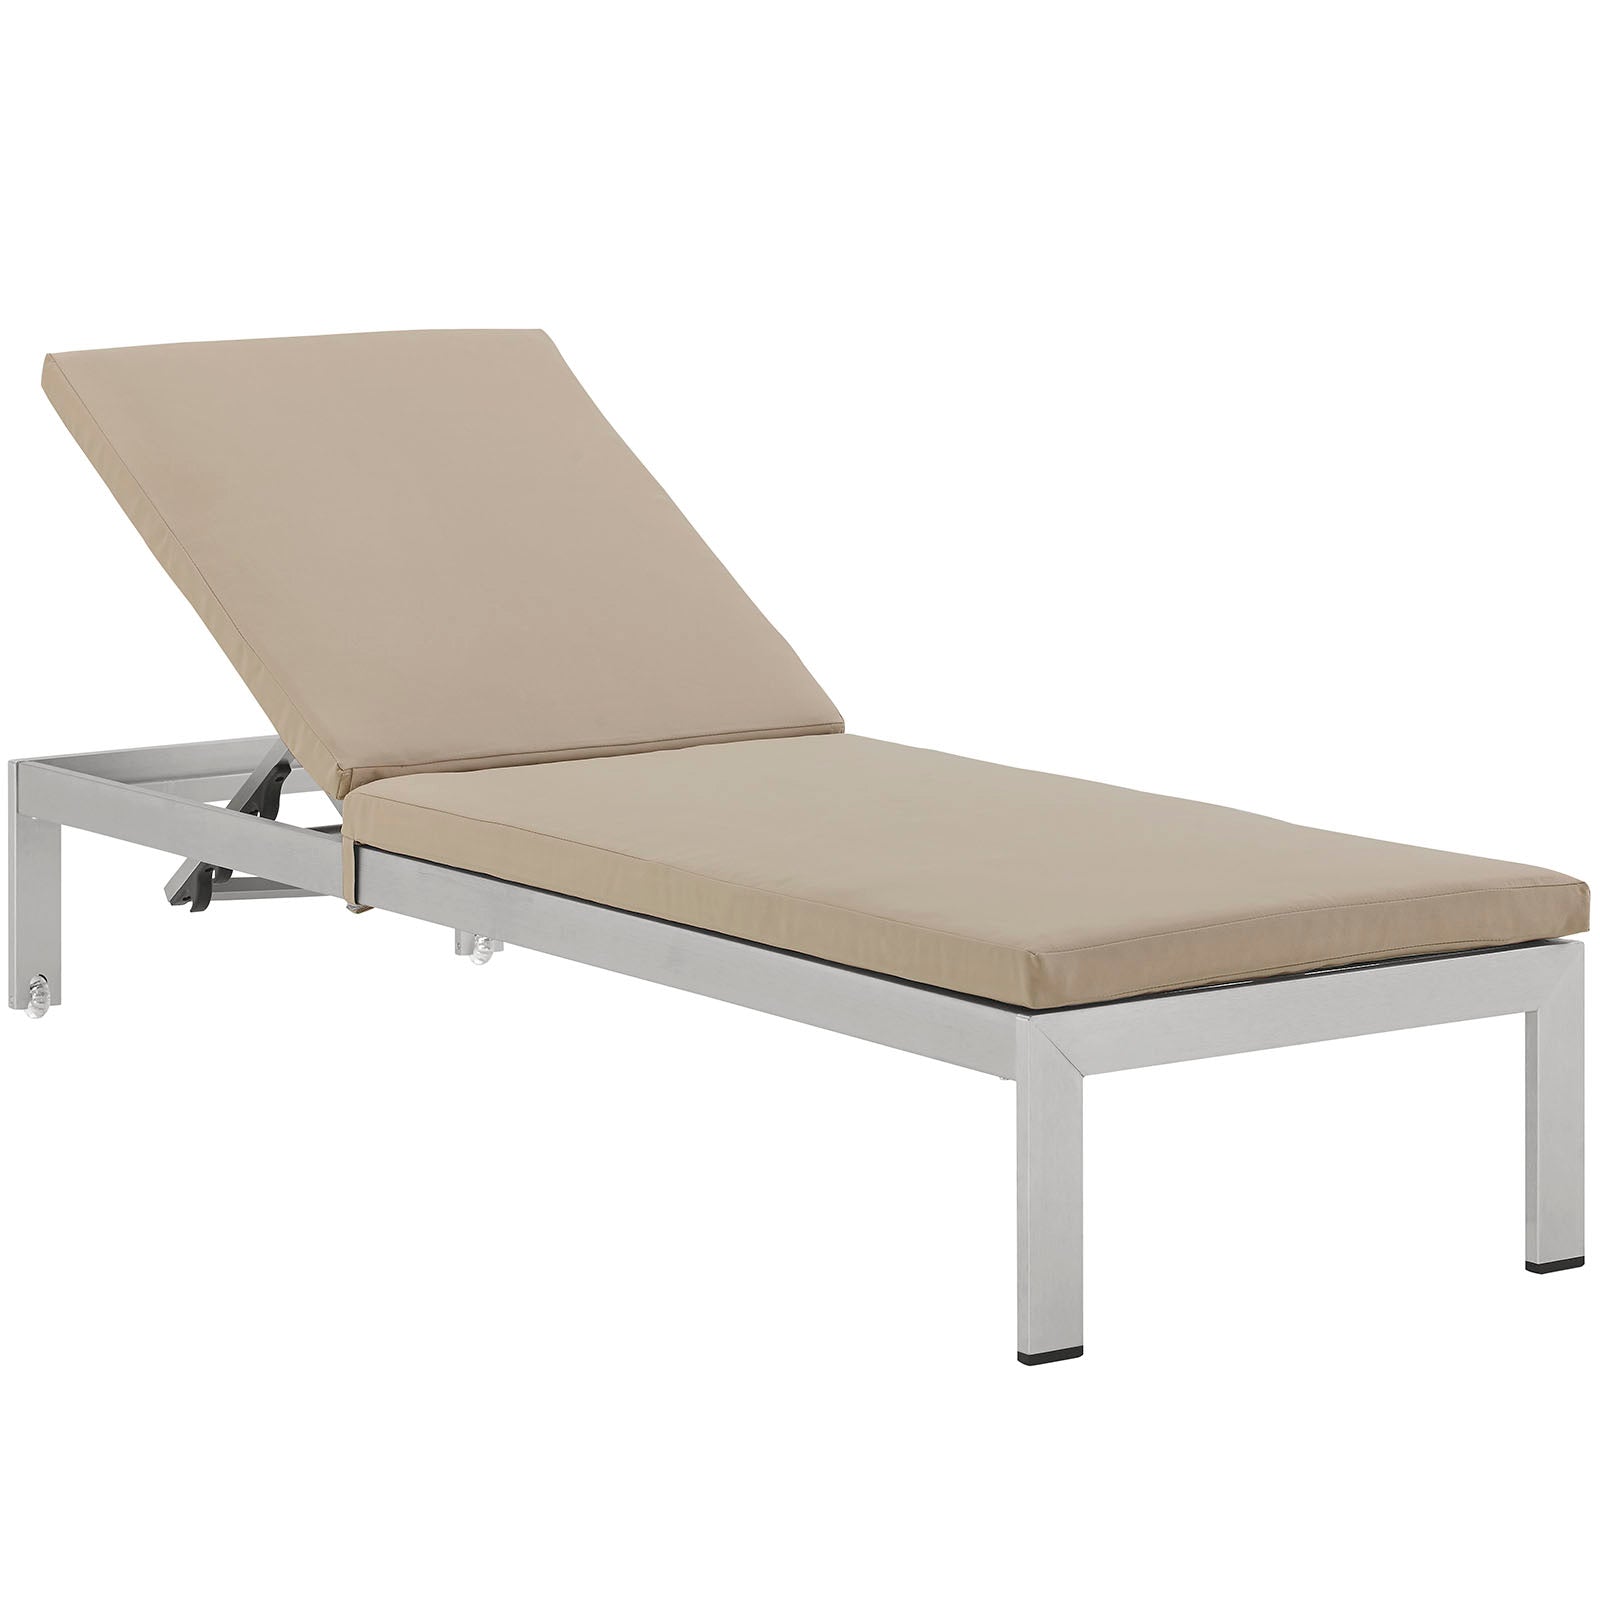 Shore Outdoor Patio Chaise with Cushions Beige